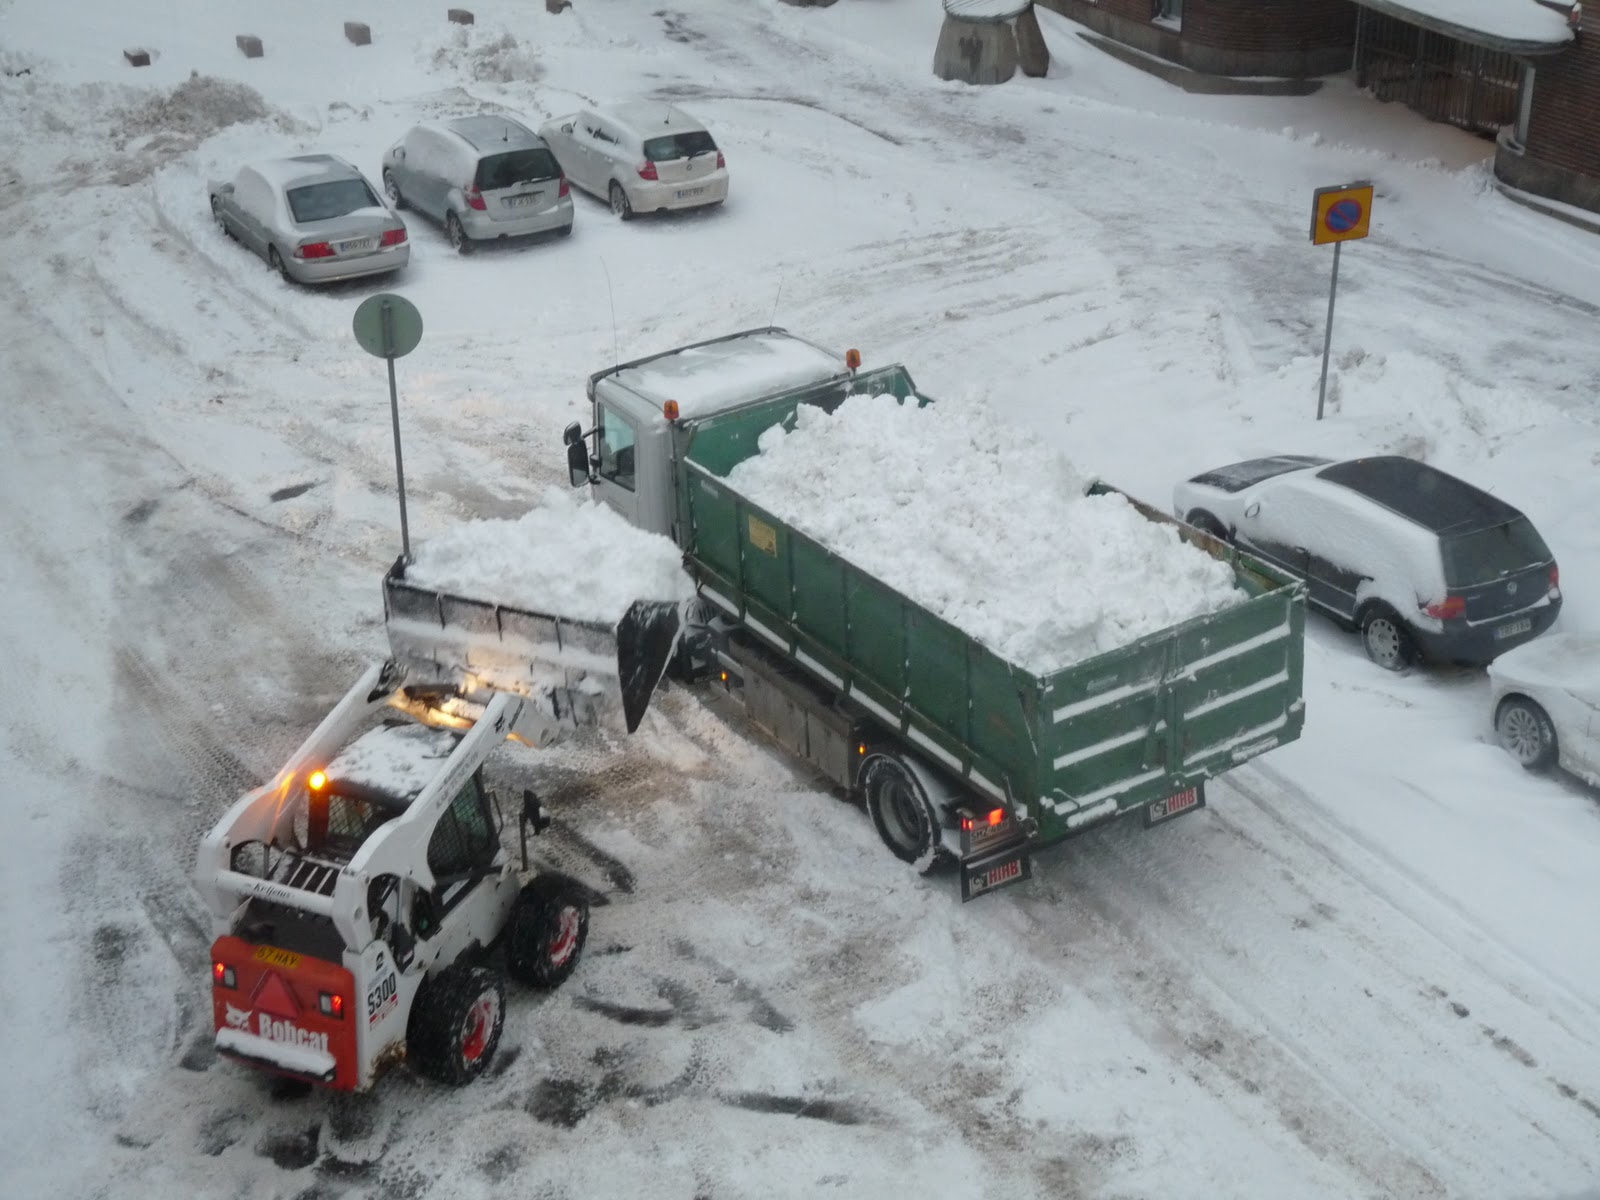 Eventually a truck comes to pick up all the piles of snow!